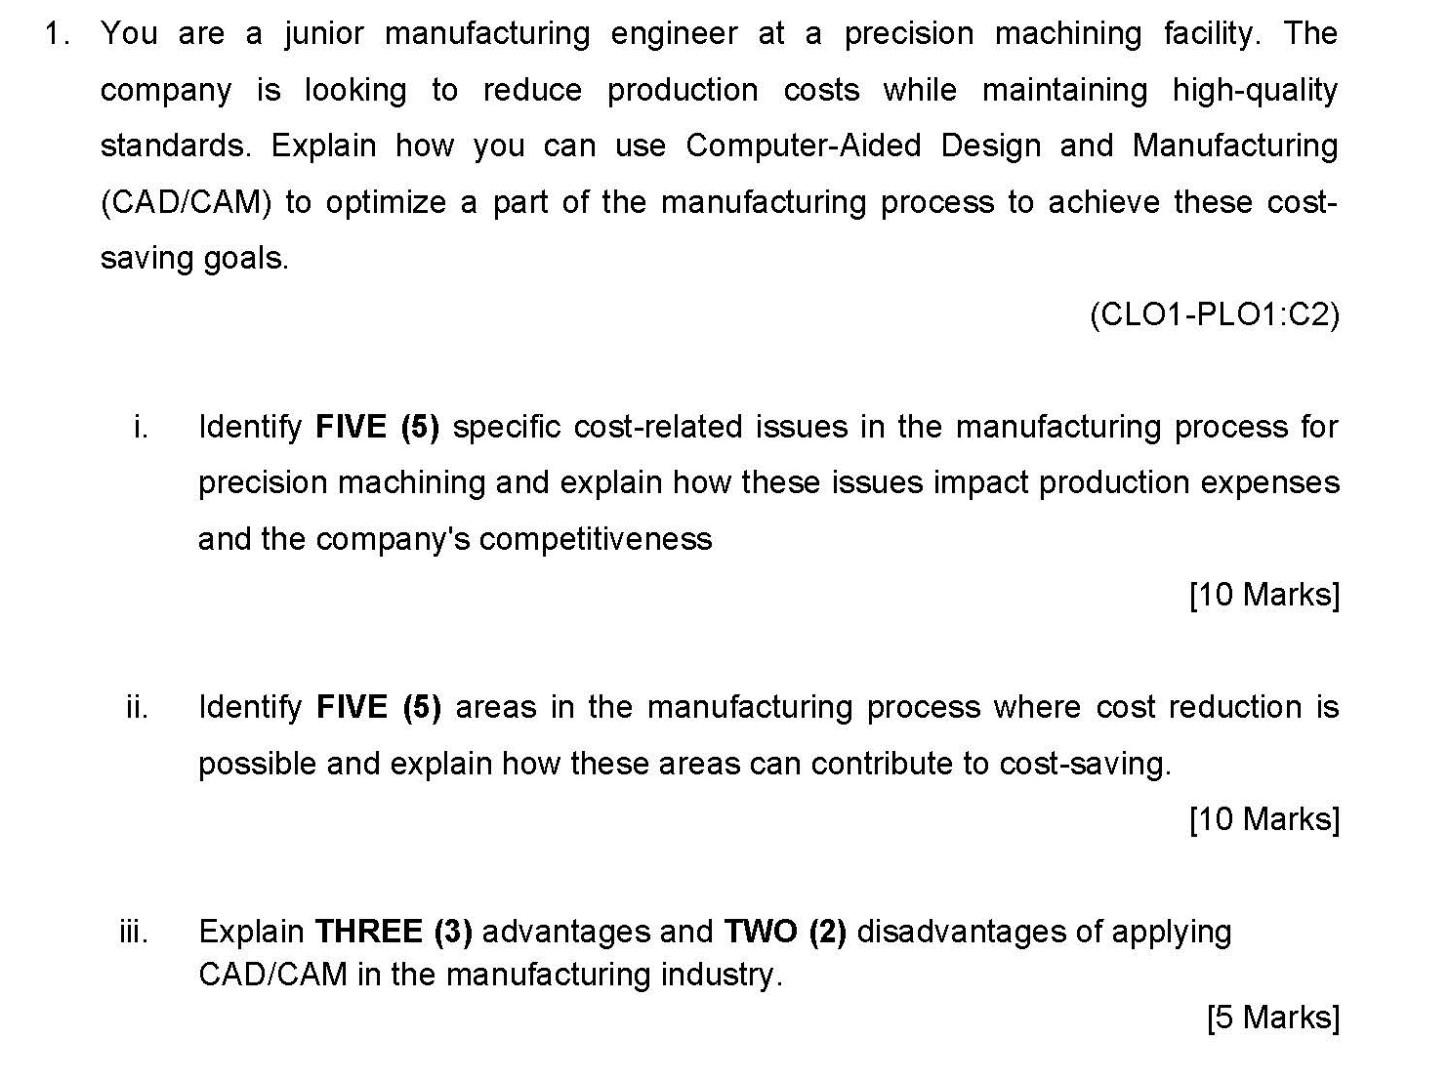 1. You are a junior manufacturing engineer at a precision machining facility. The company is looking to